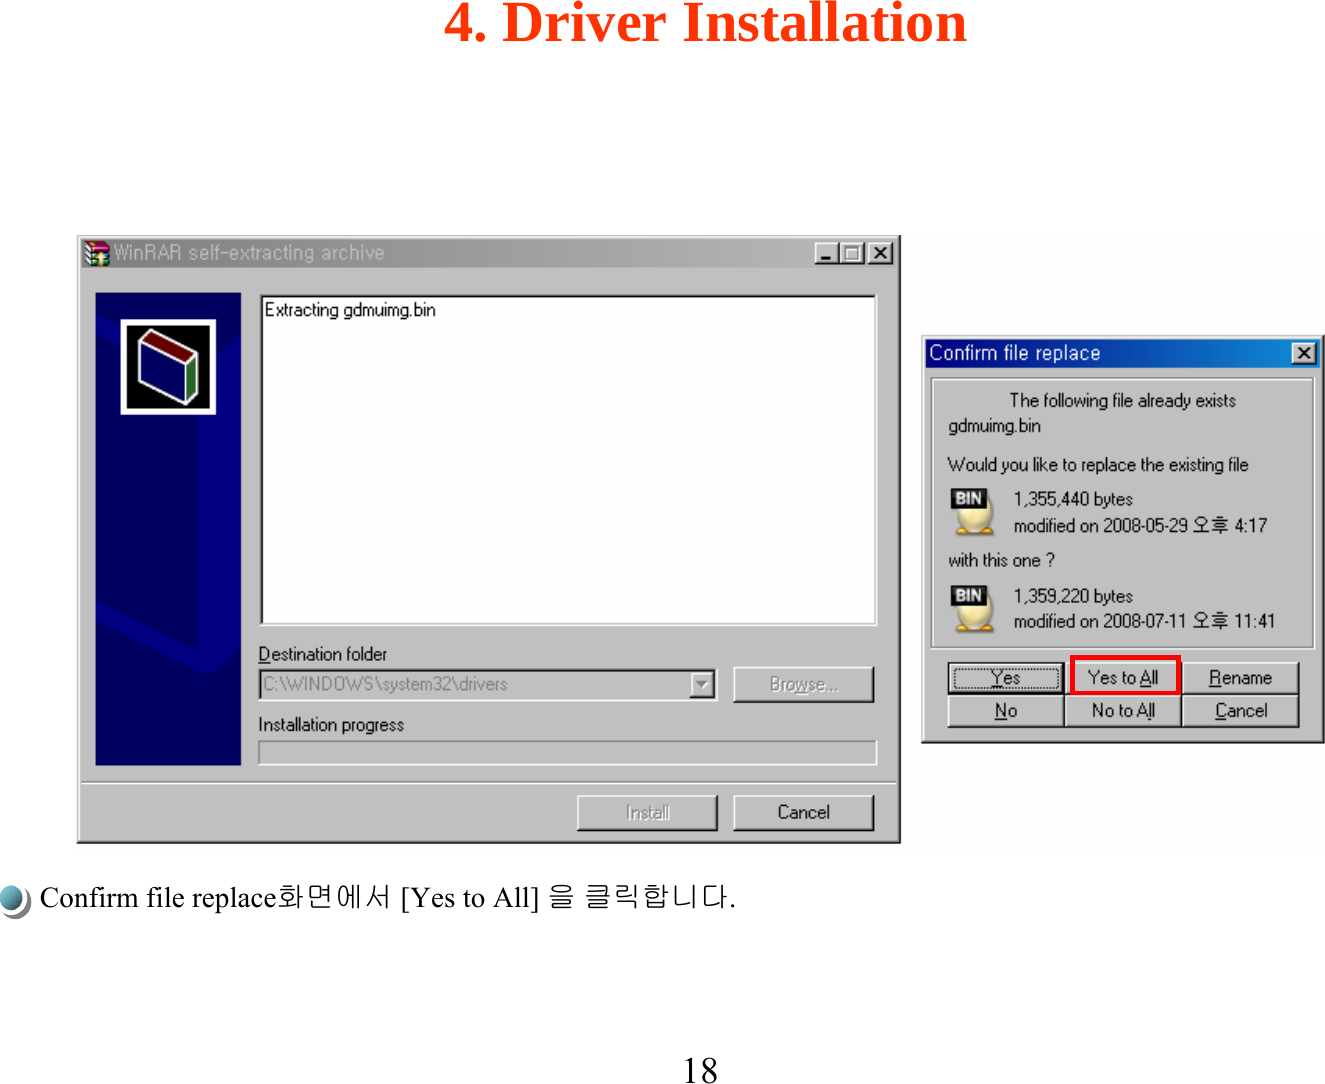 18Confirm file replace화면에서 [Yes to All] 을 클릭합니다. 4. Driver Installation